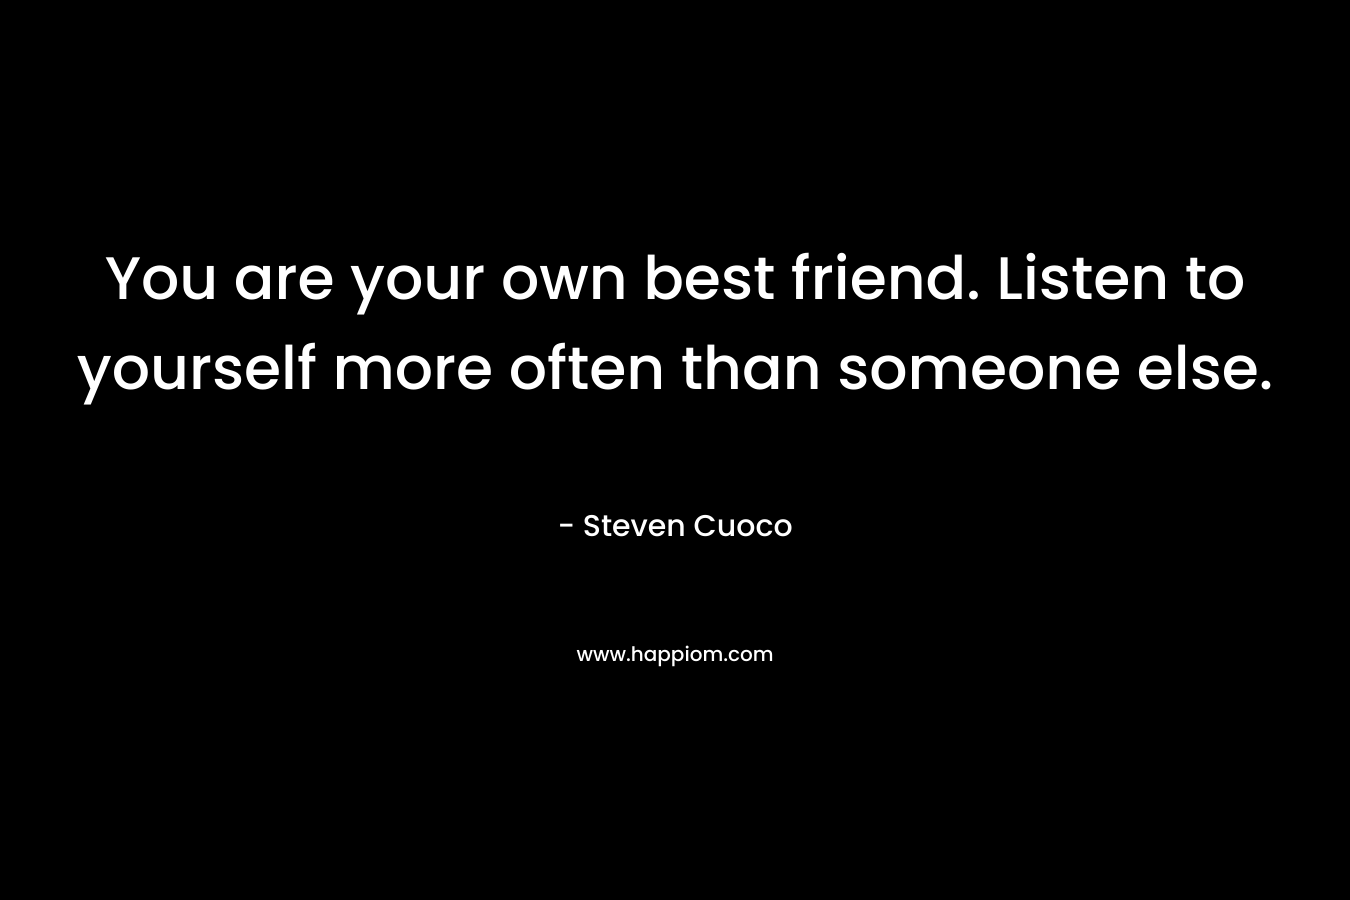 You are your own best friend. Listen to yourself more often than someone else.